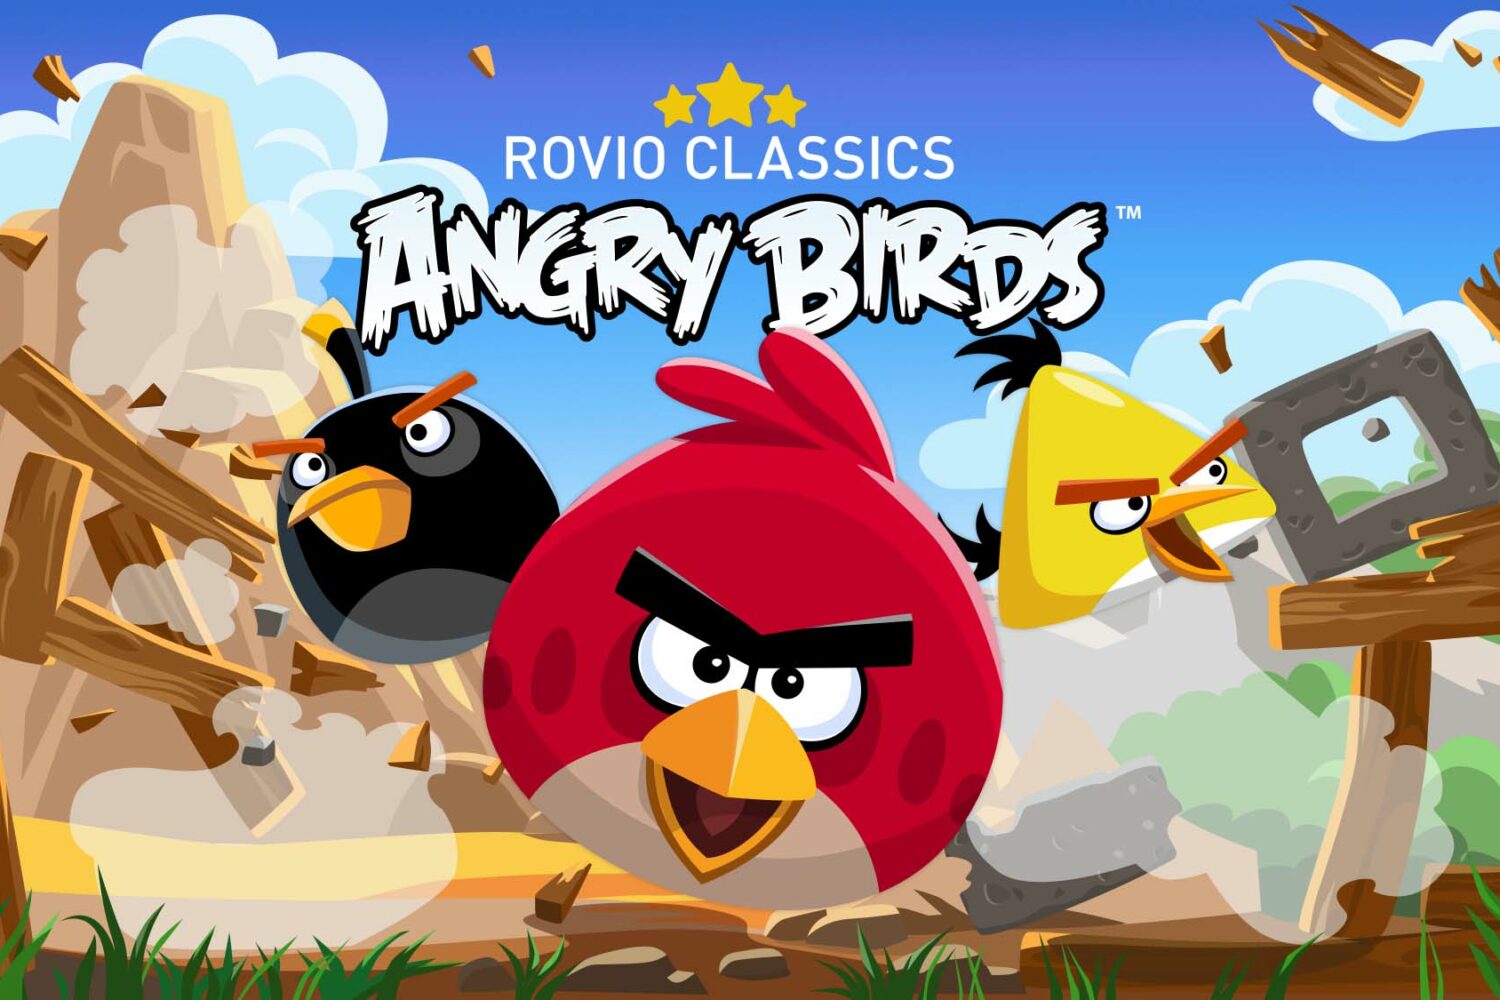 Rovio's marketing image showcasing Angry Birds Classic, a remastered version of the original game with no ads or in-app purchases